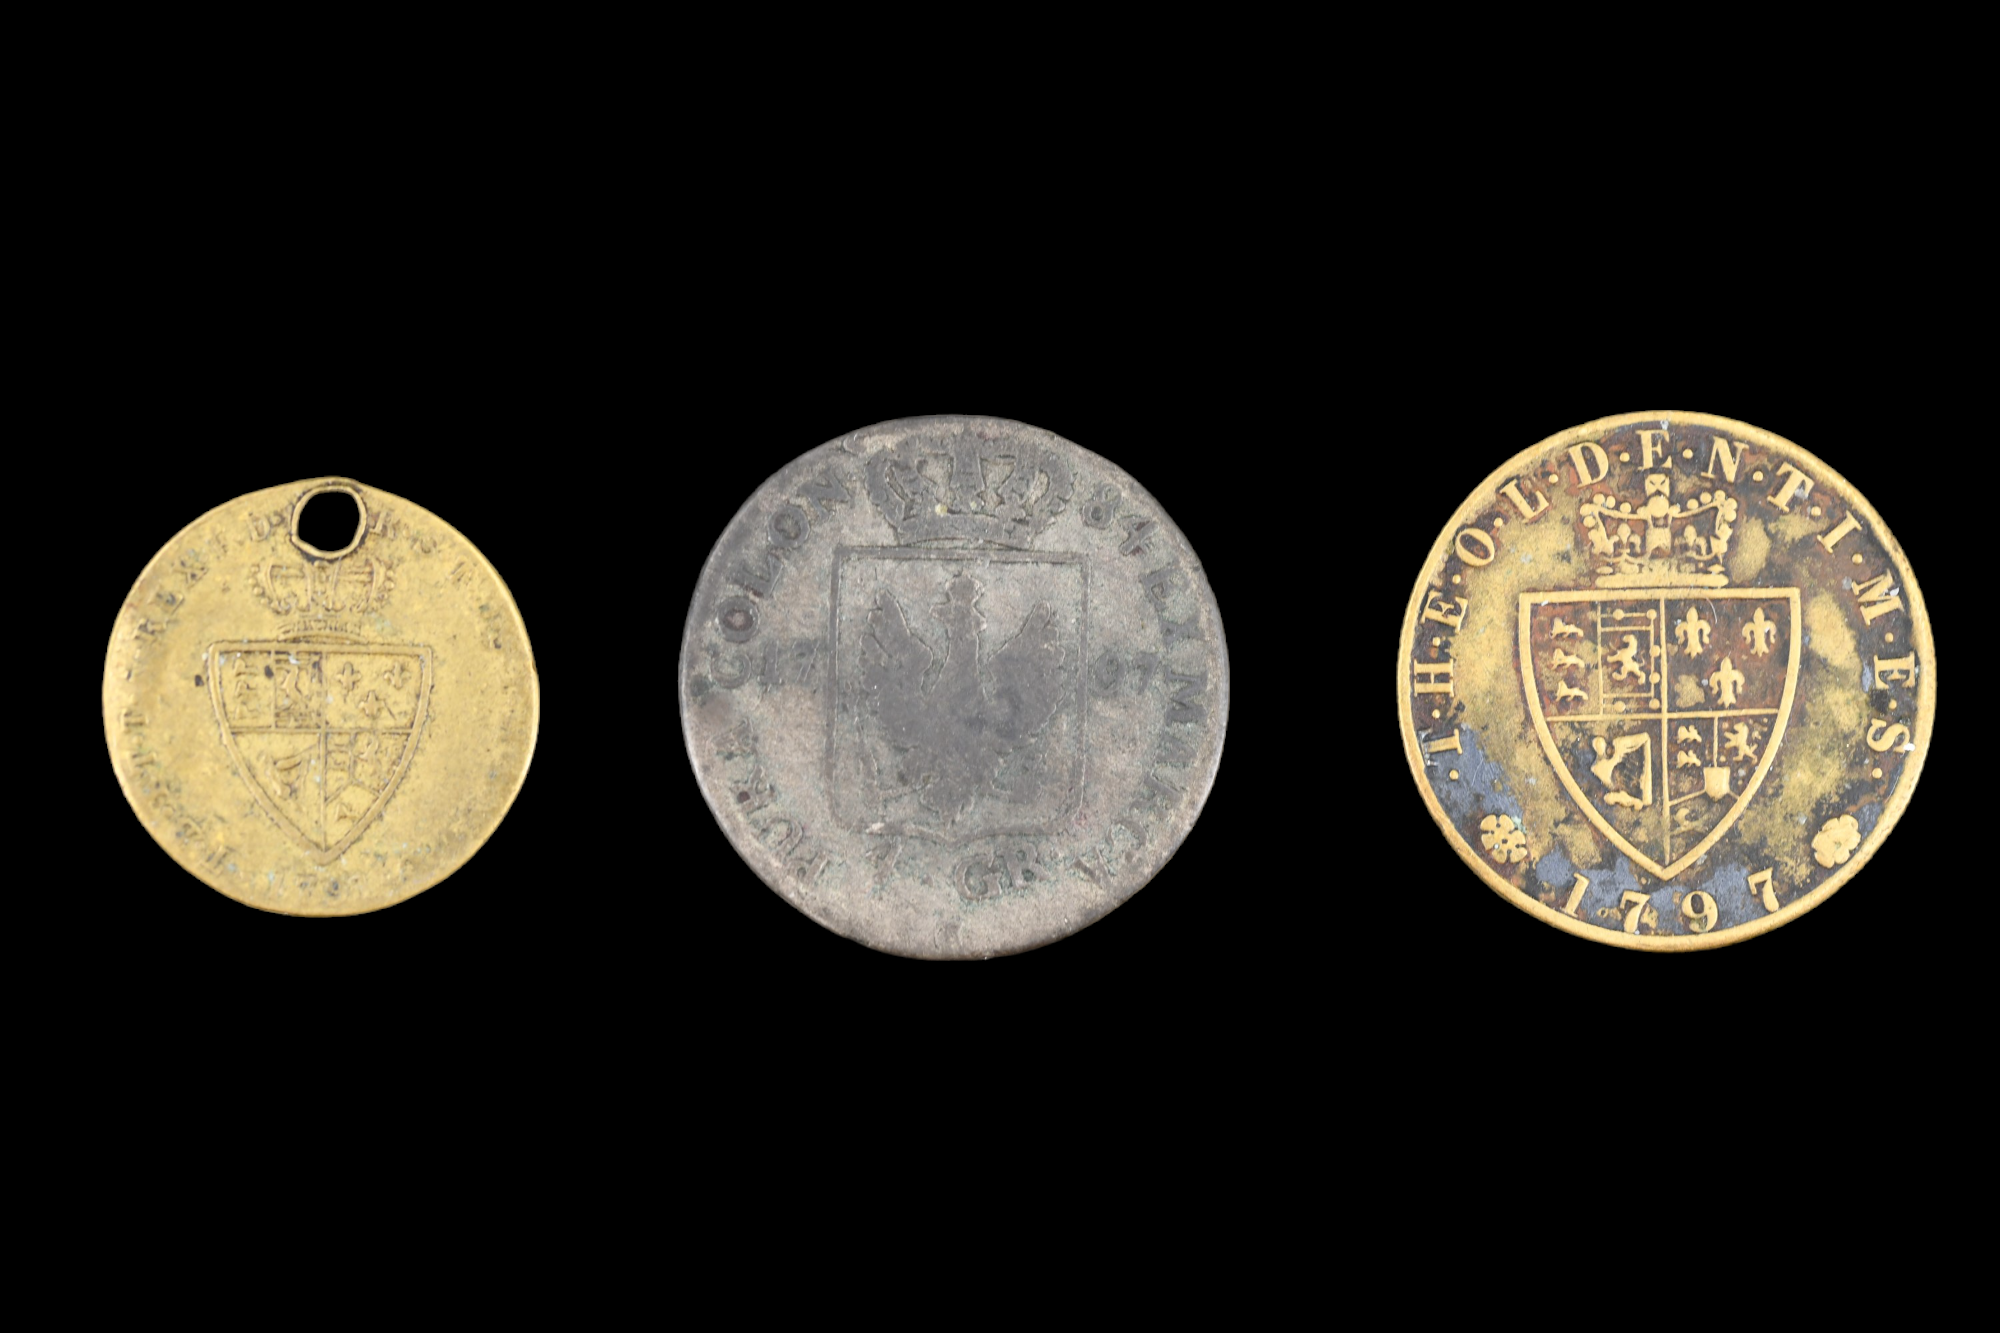 A Prussian 1797 4 Groschen coin of Frederick William II together with two Georgian gaming tokens